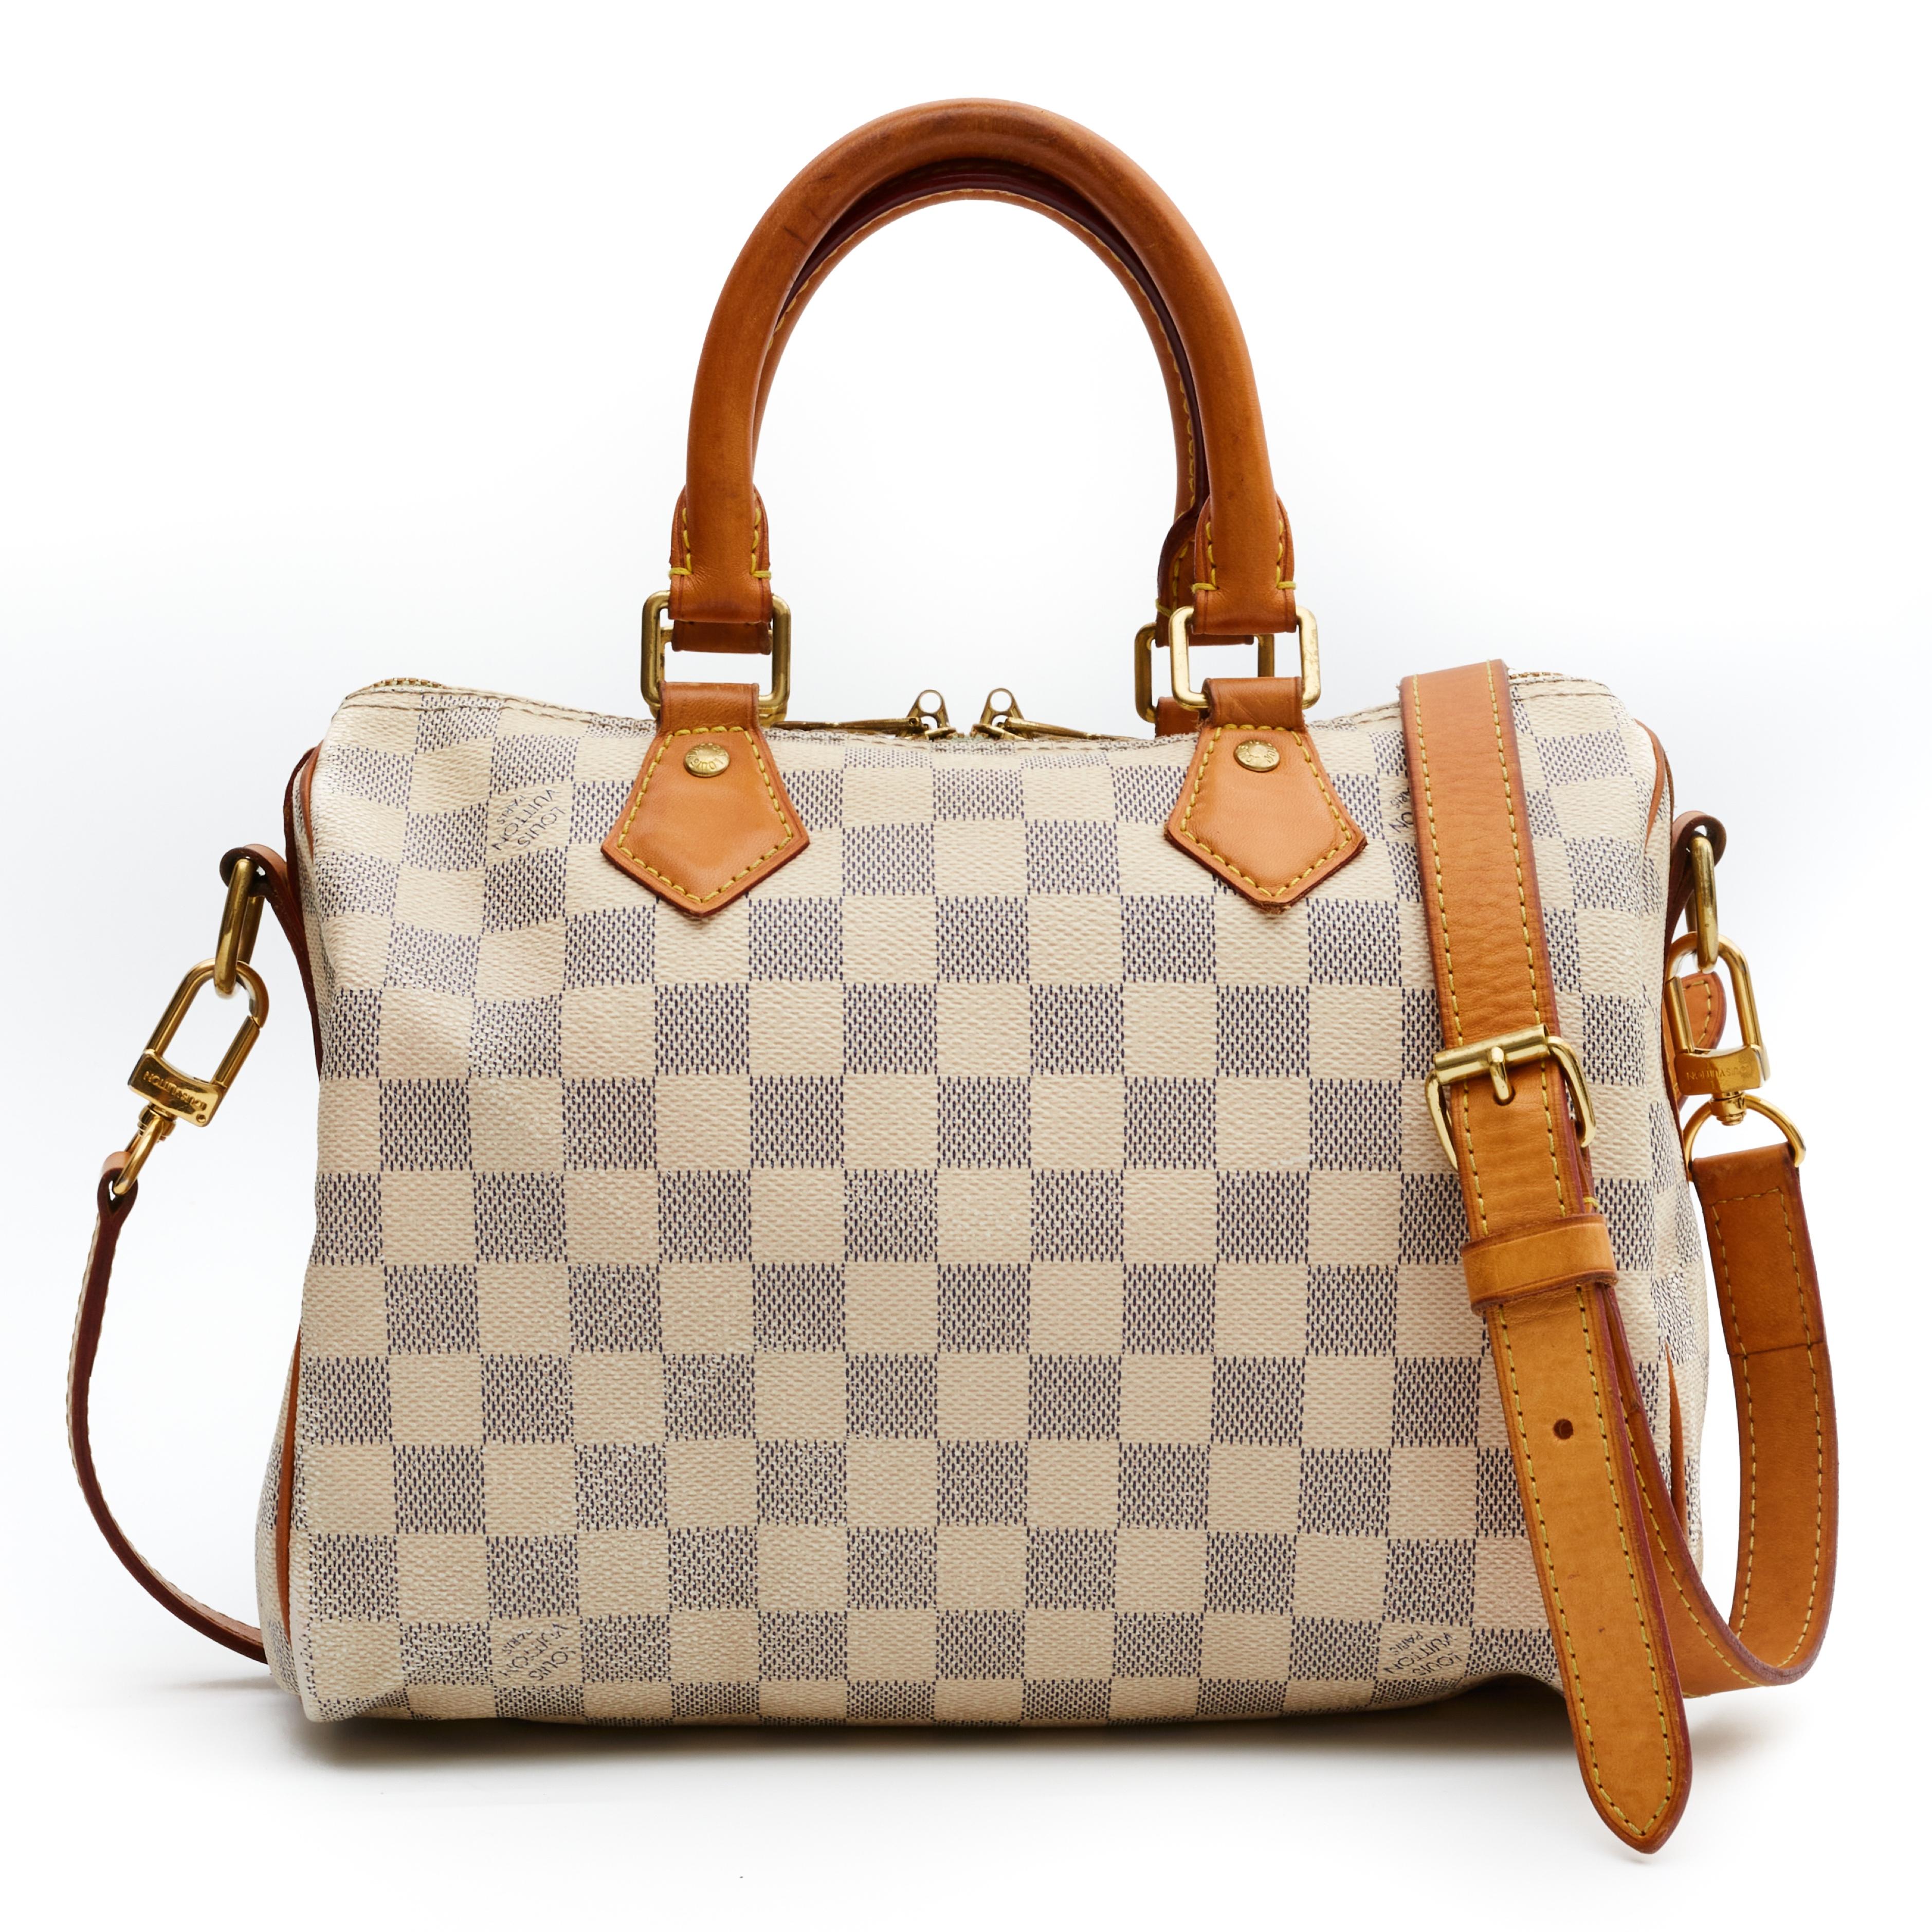 This style Speedy 25 Bandouliere (French for shoulder strap) is made with white canvas with Damier Azur print and features gold tone hardware, natural leather finishes, rolled leather handles, top zip closure and comes with an adjustable shoulder